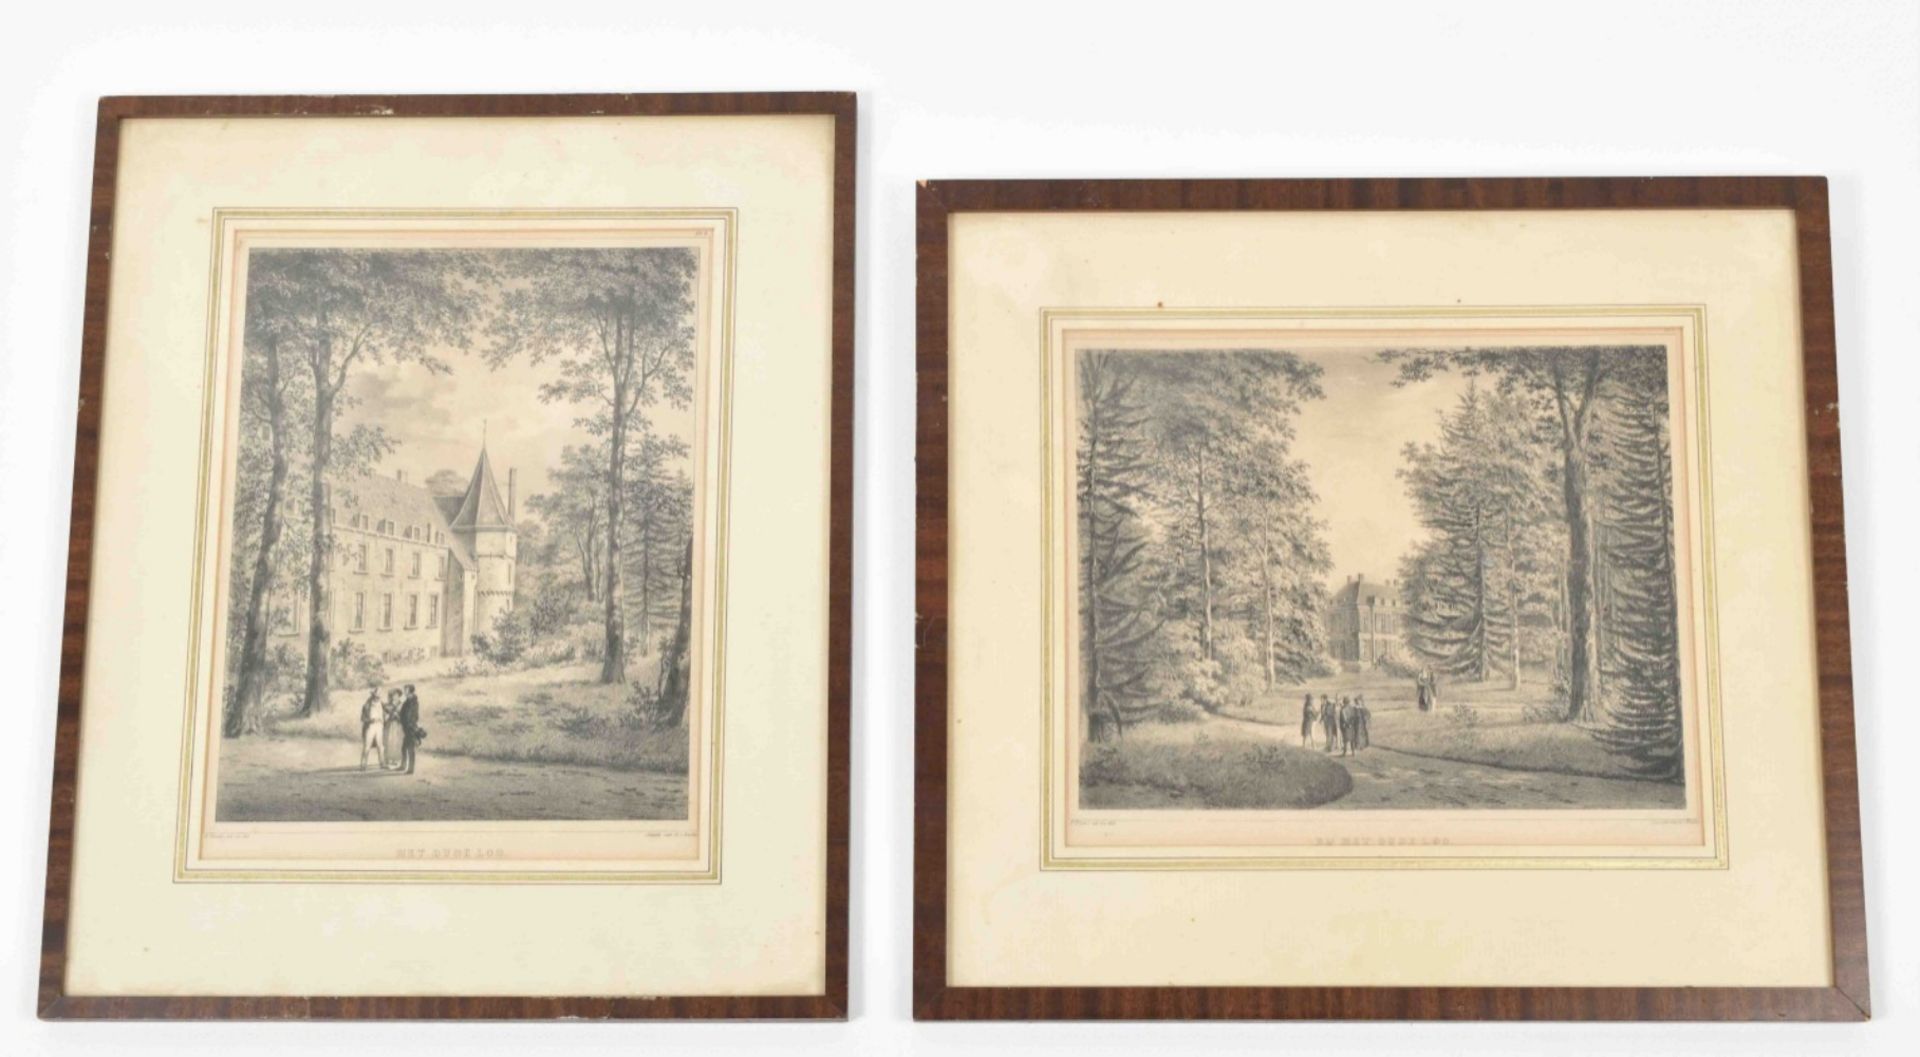 Series of 6 lithogr. views of the palace and surroundings - Bild 3 aus 8